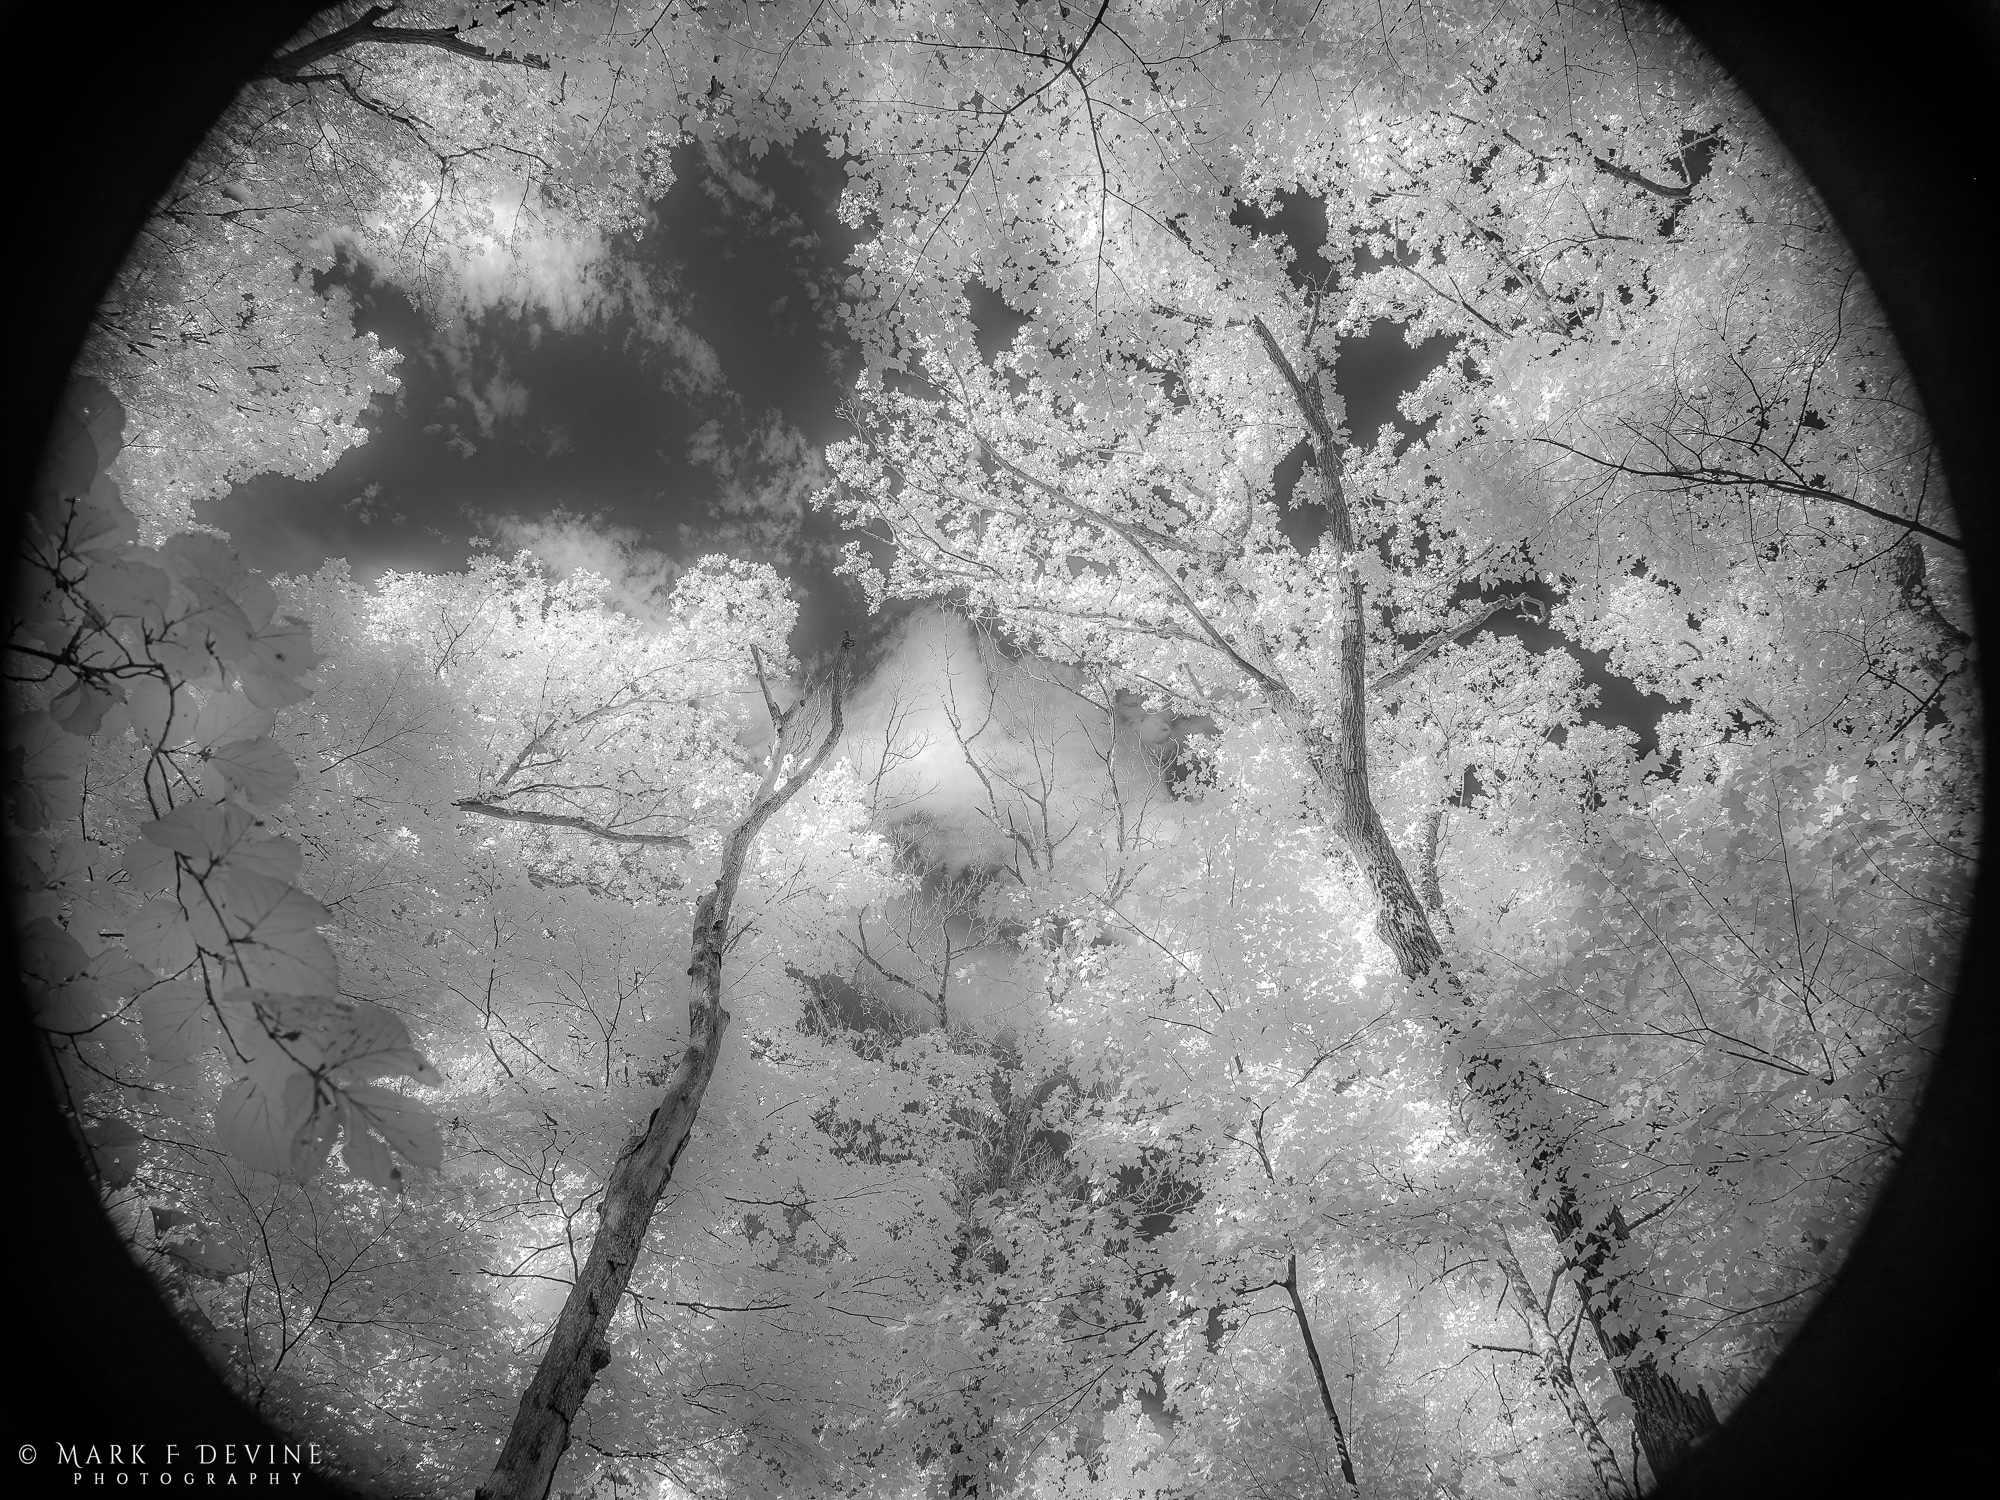 The view in this infrared image is straight up into the fall canopy along a hiking trail in the Baraboo Hills area. A dreamy...